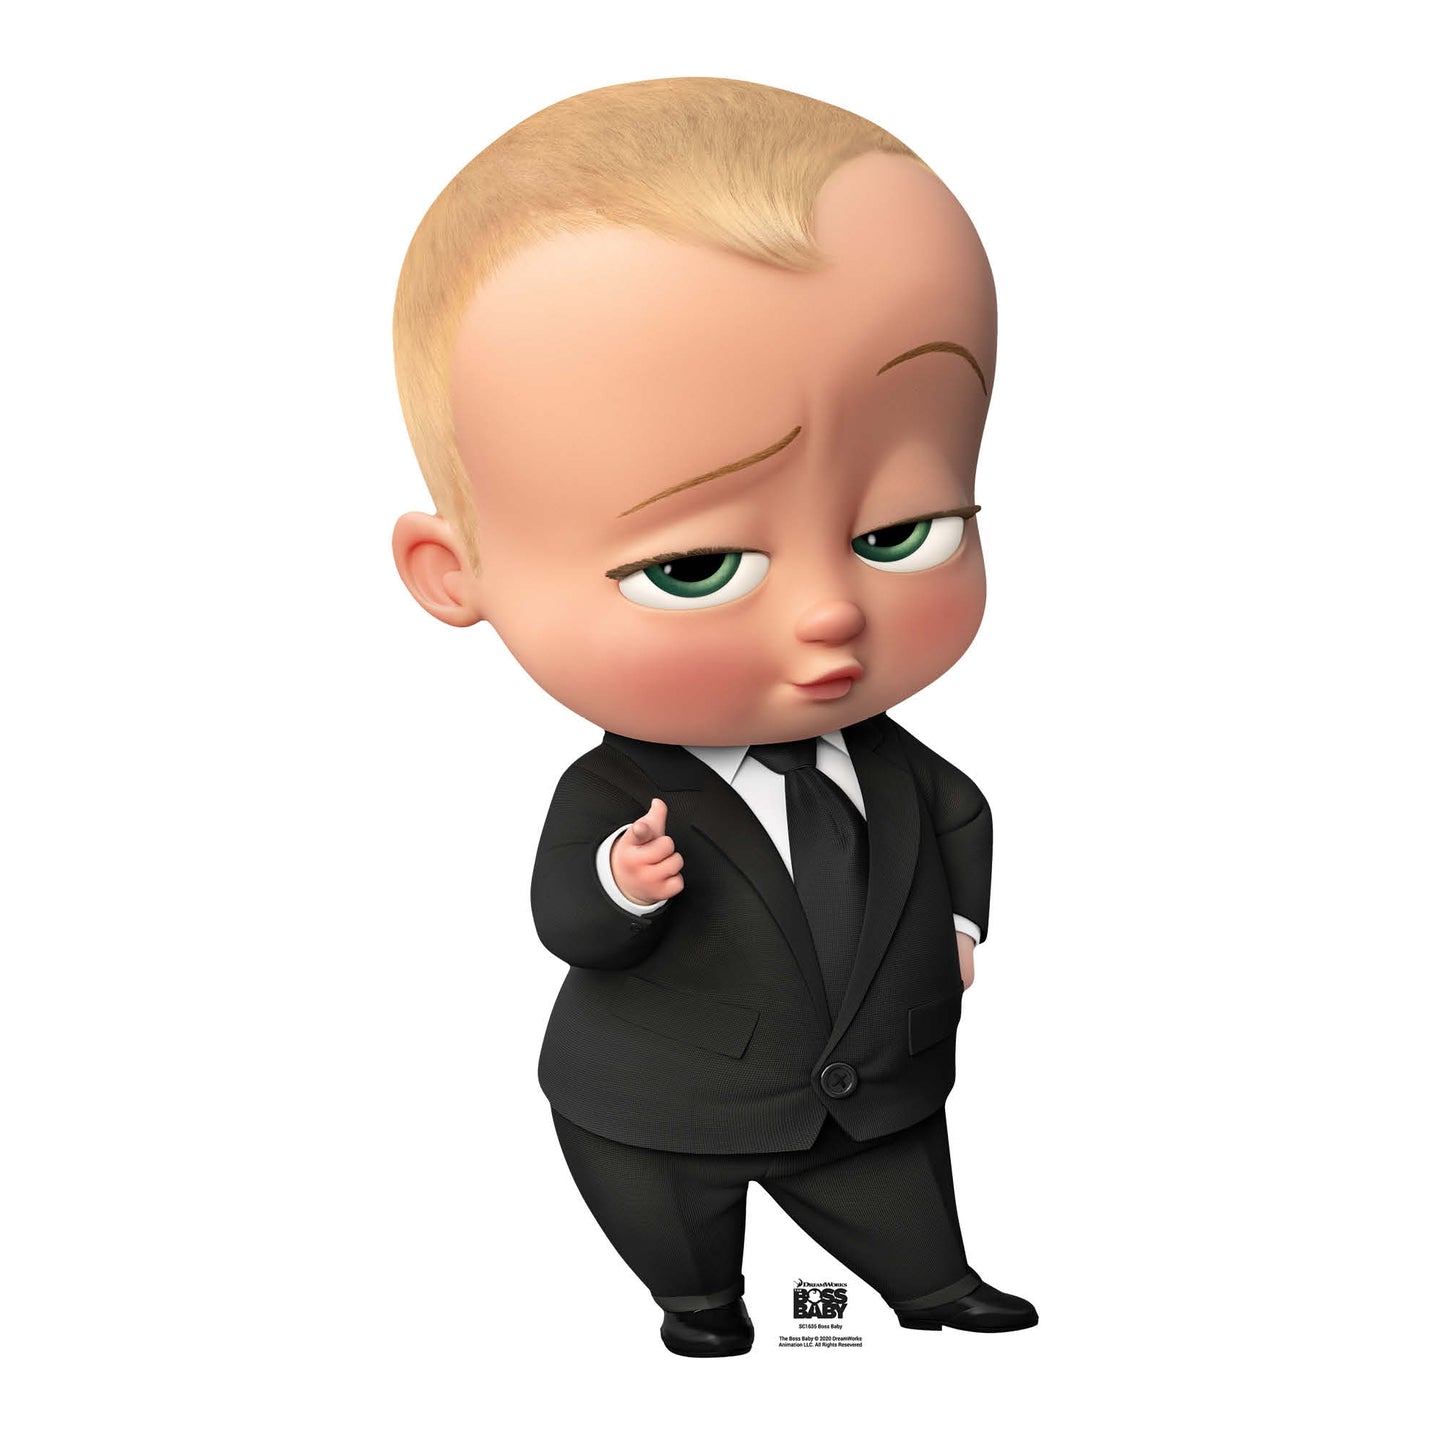 SC1635 Boss Baby Cardboard Cut Out Height 89cm - Star Cutouts